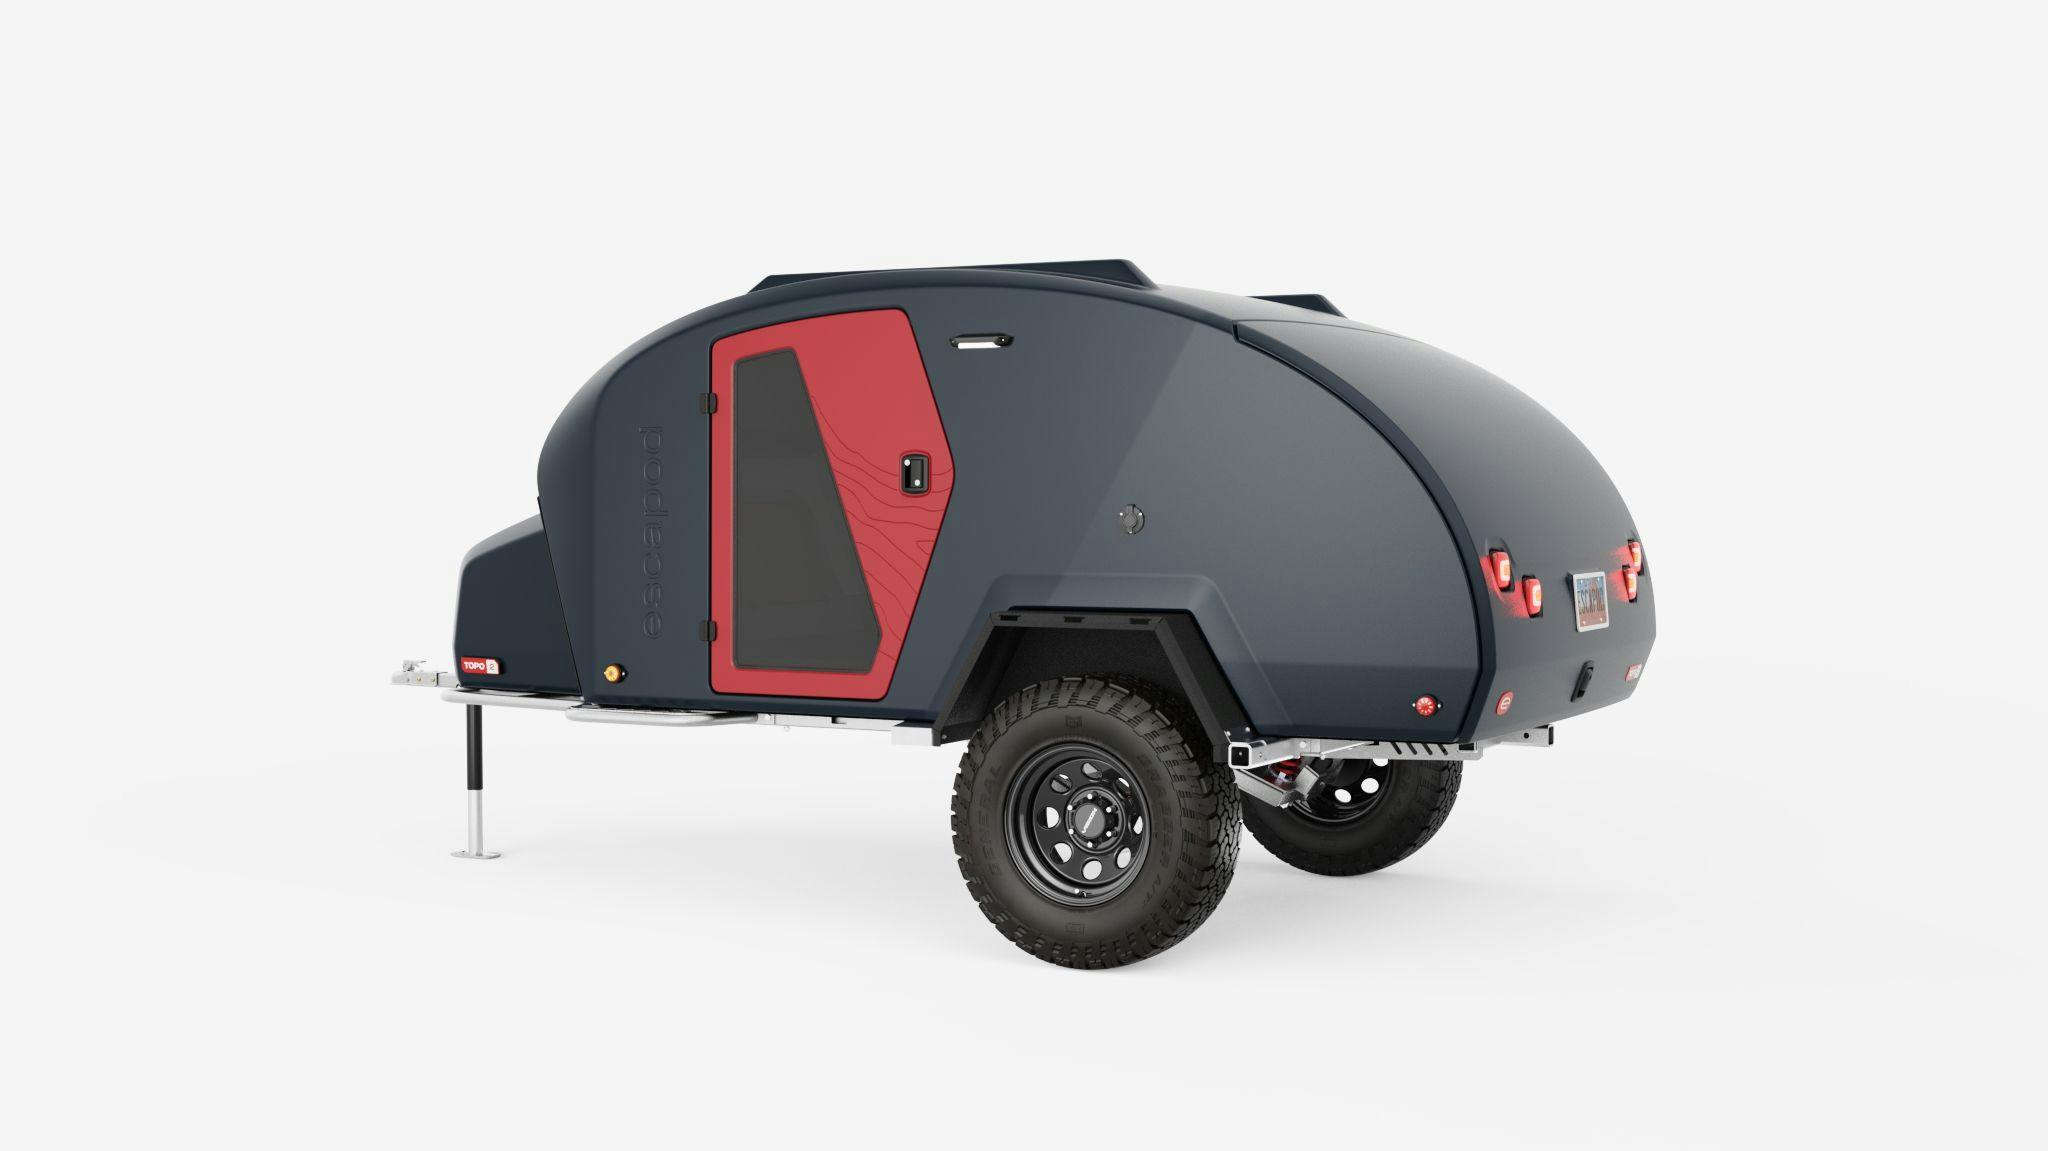 Rendering of the TOPO2 Nomad, displaying to composite monocoque body